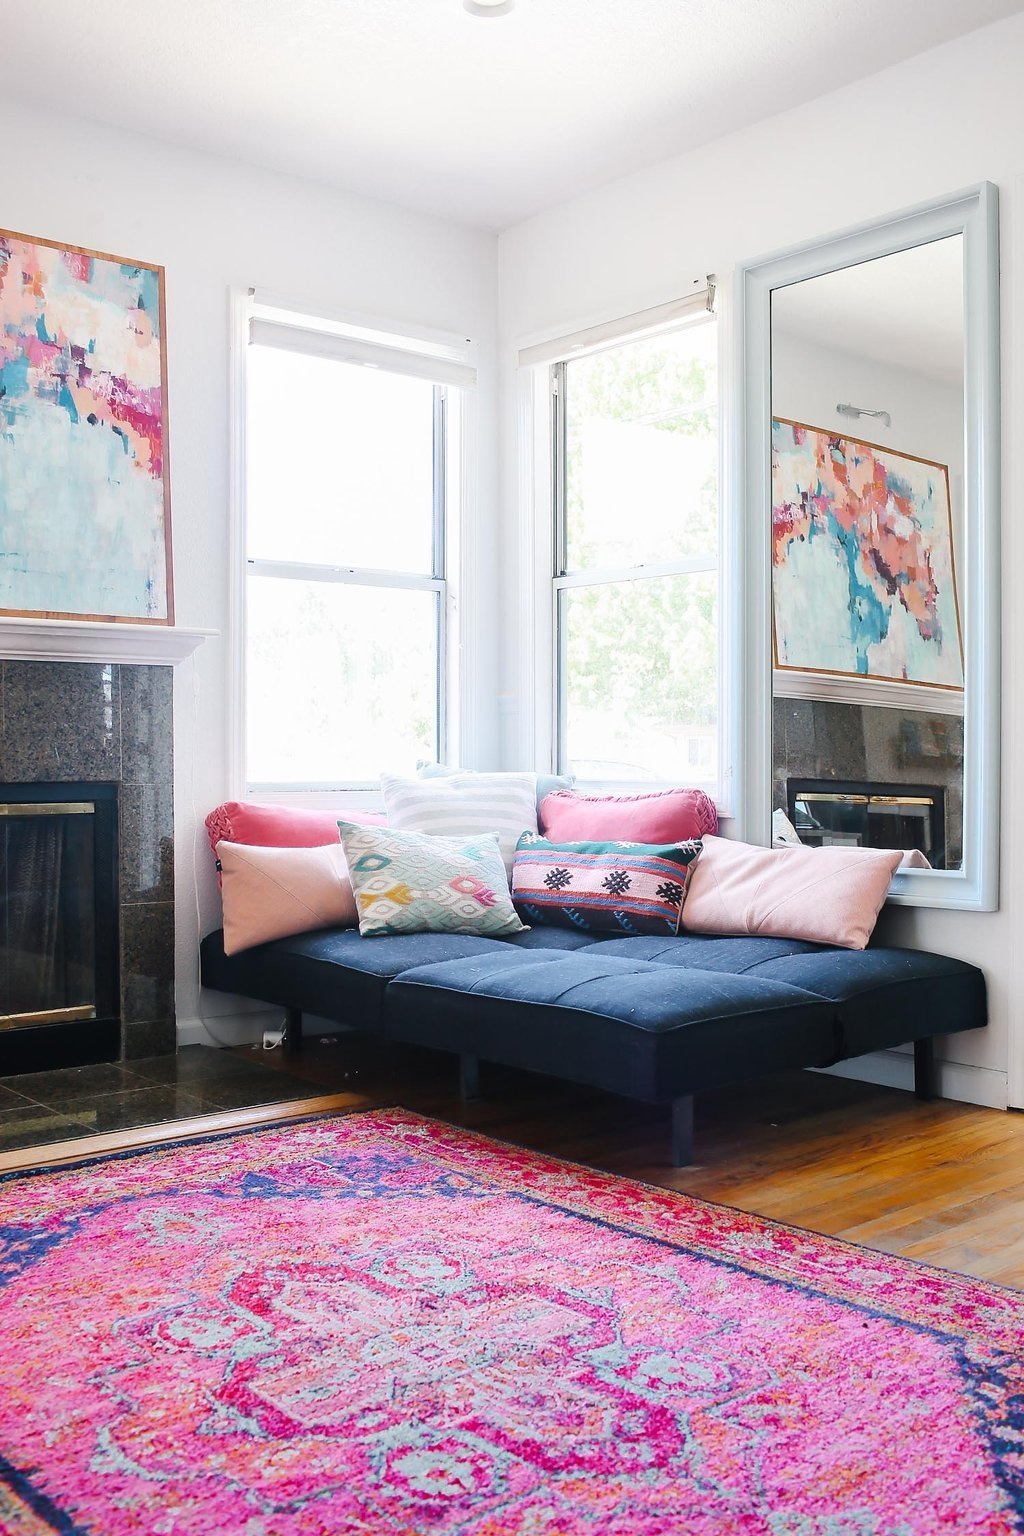 Corner chaise with pillows via Apartment Therapy